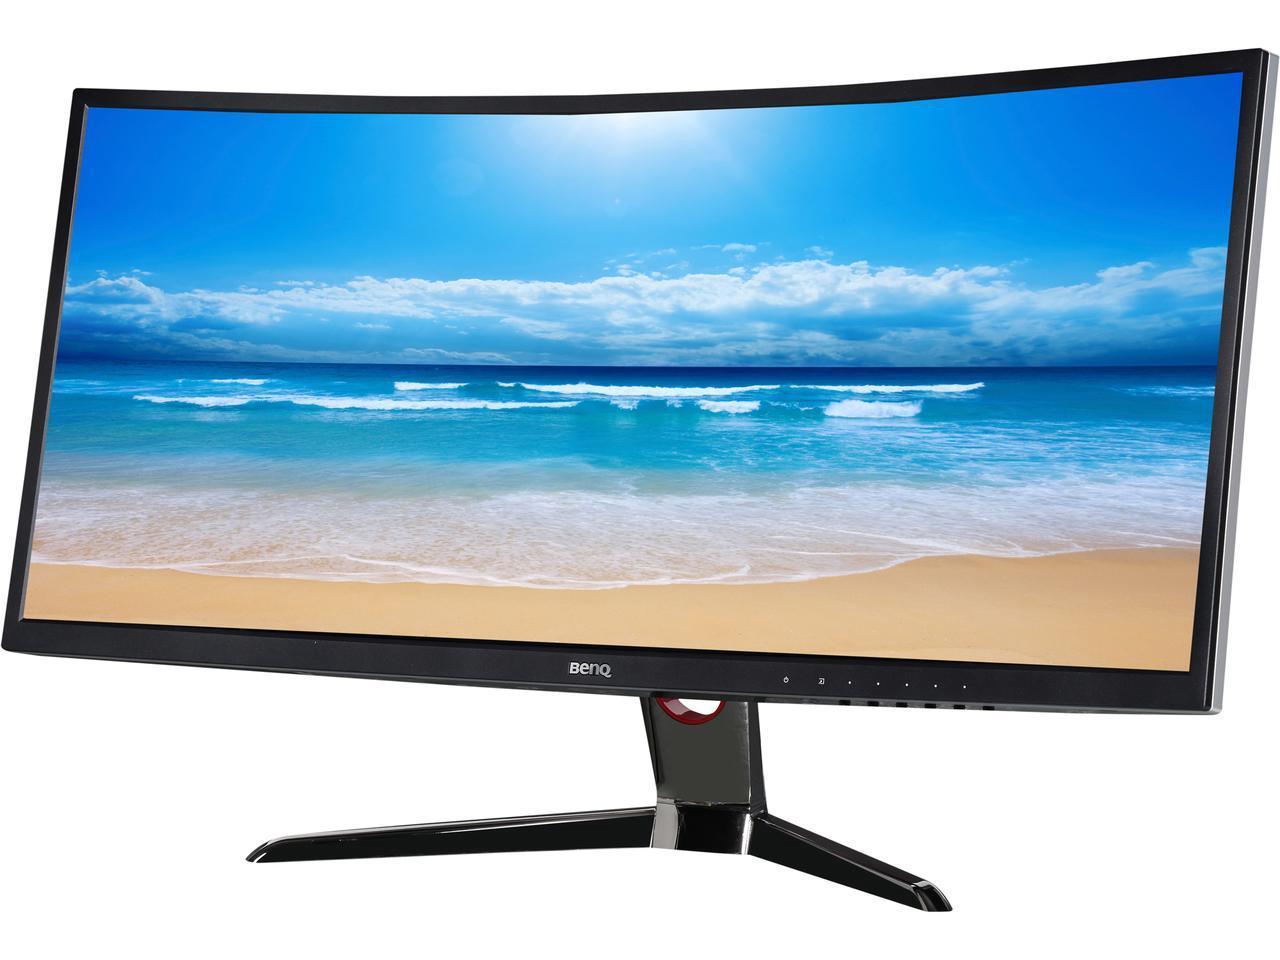 Newegg has knocked $100 off this BenQ 35-inch curved monitor | PCWorld